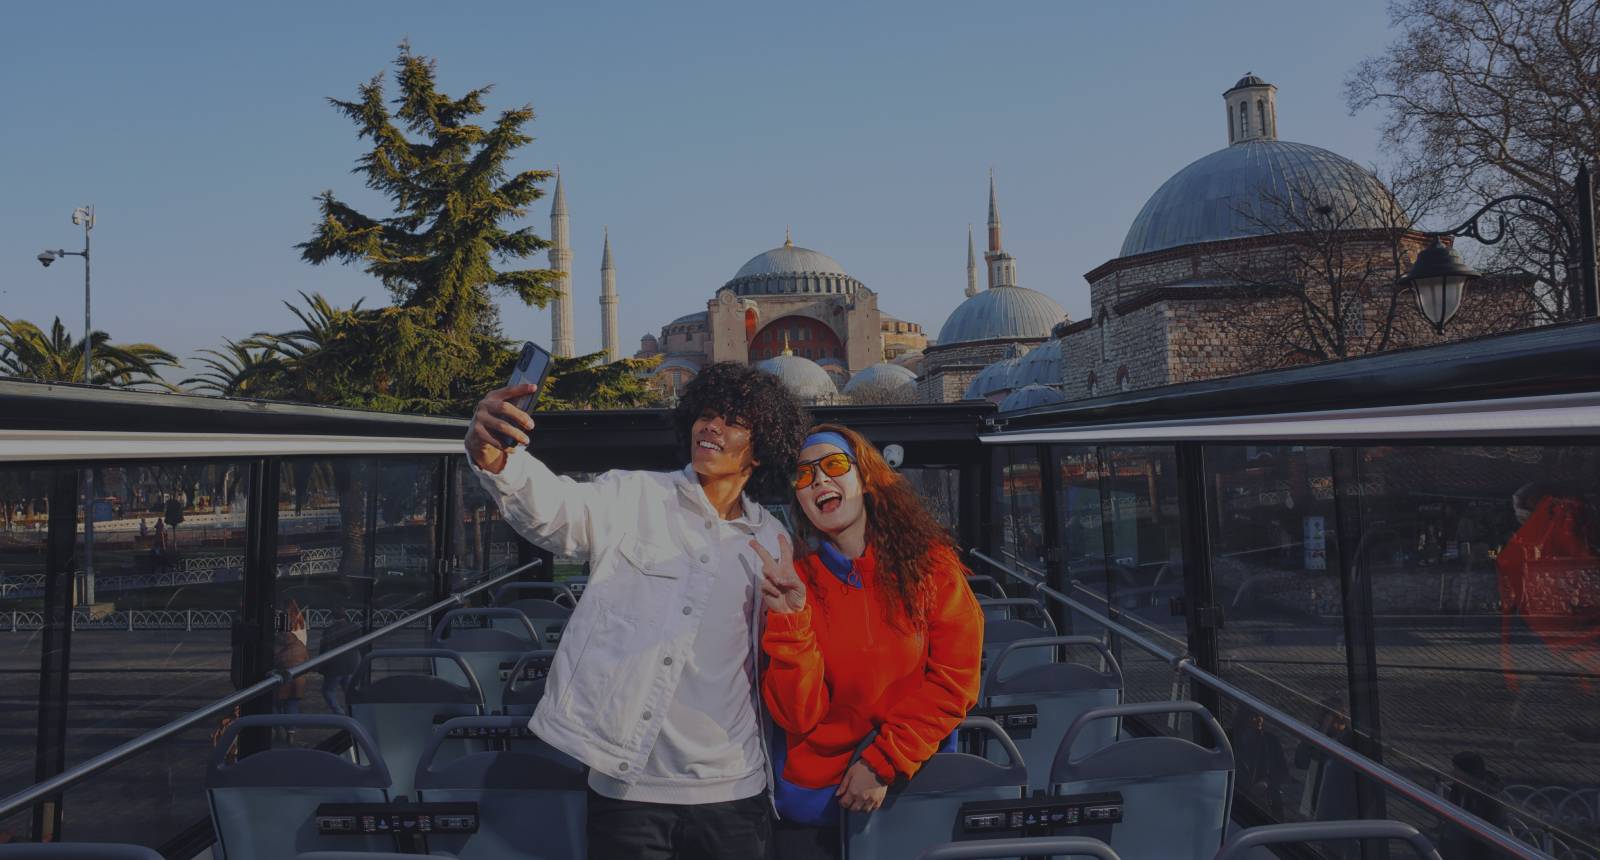 bus tours istanbul